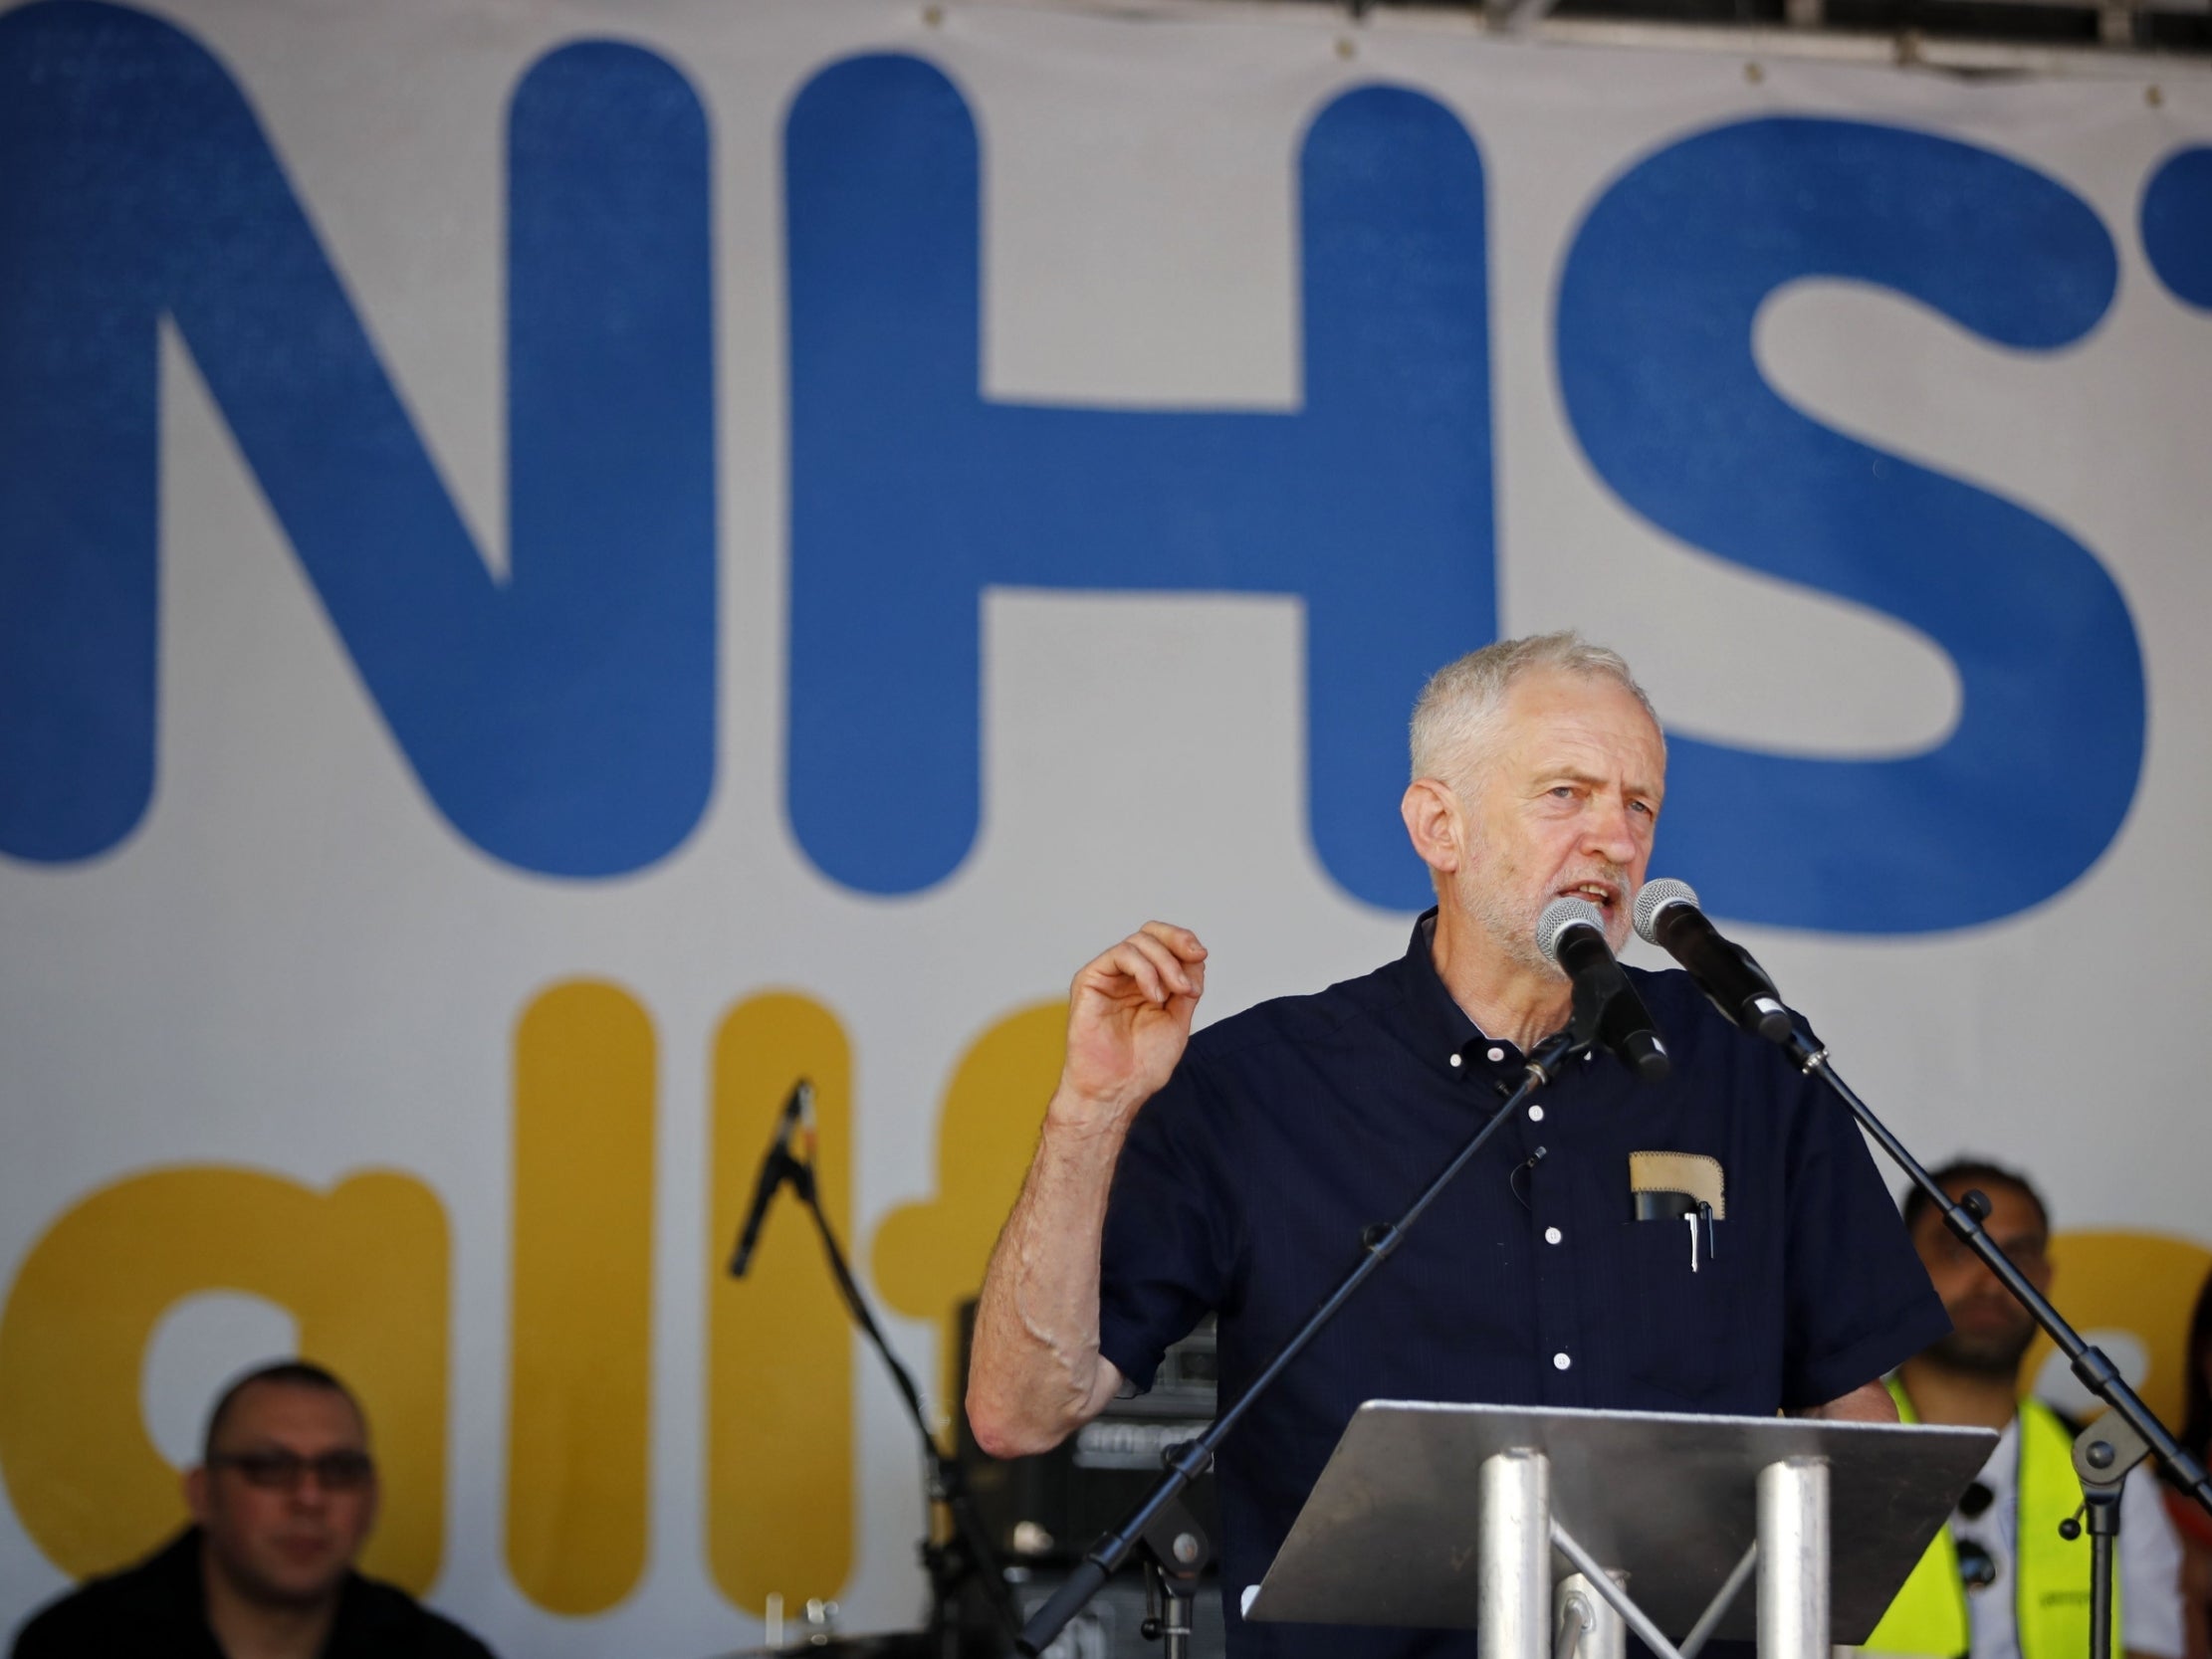 Jeremy Corbyn to say there is &apos;mounting evidence austerity is killing people&apos;